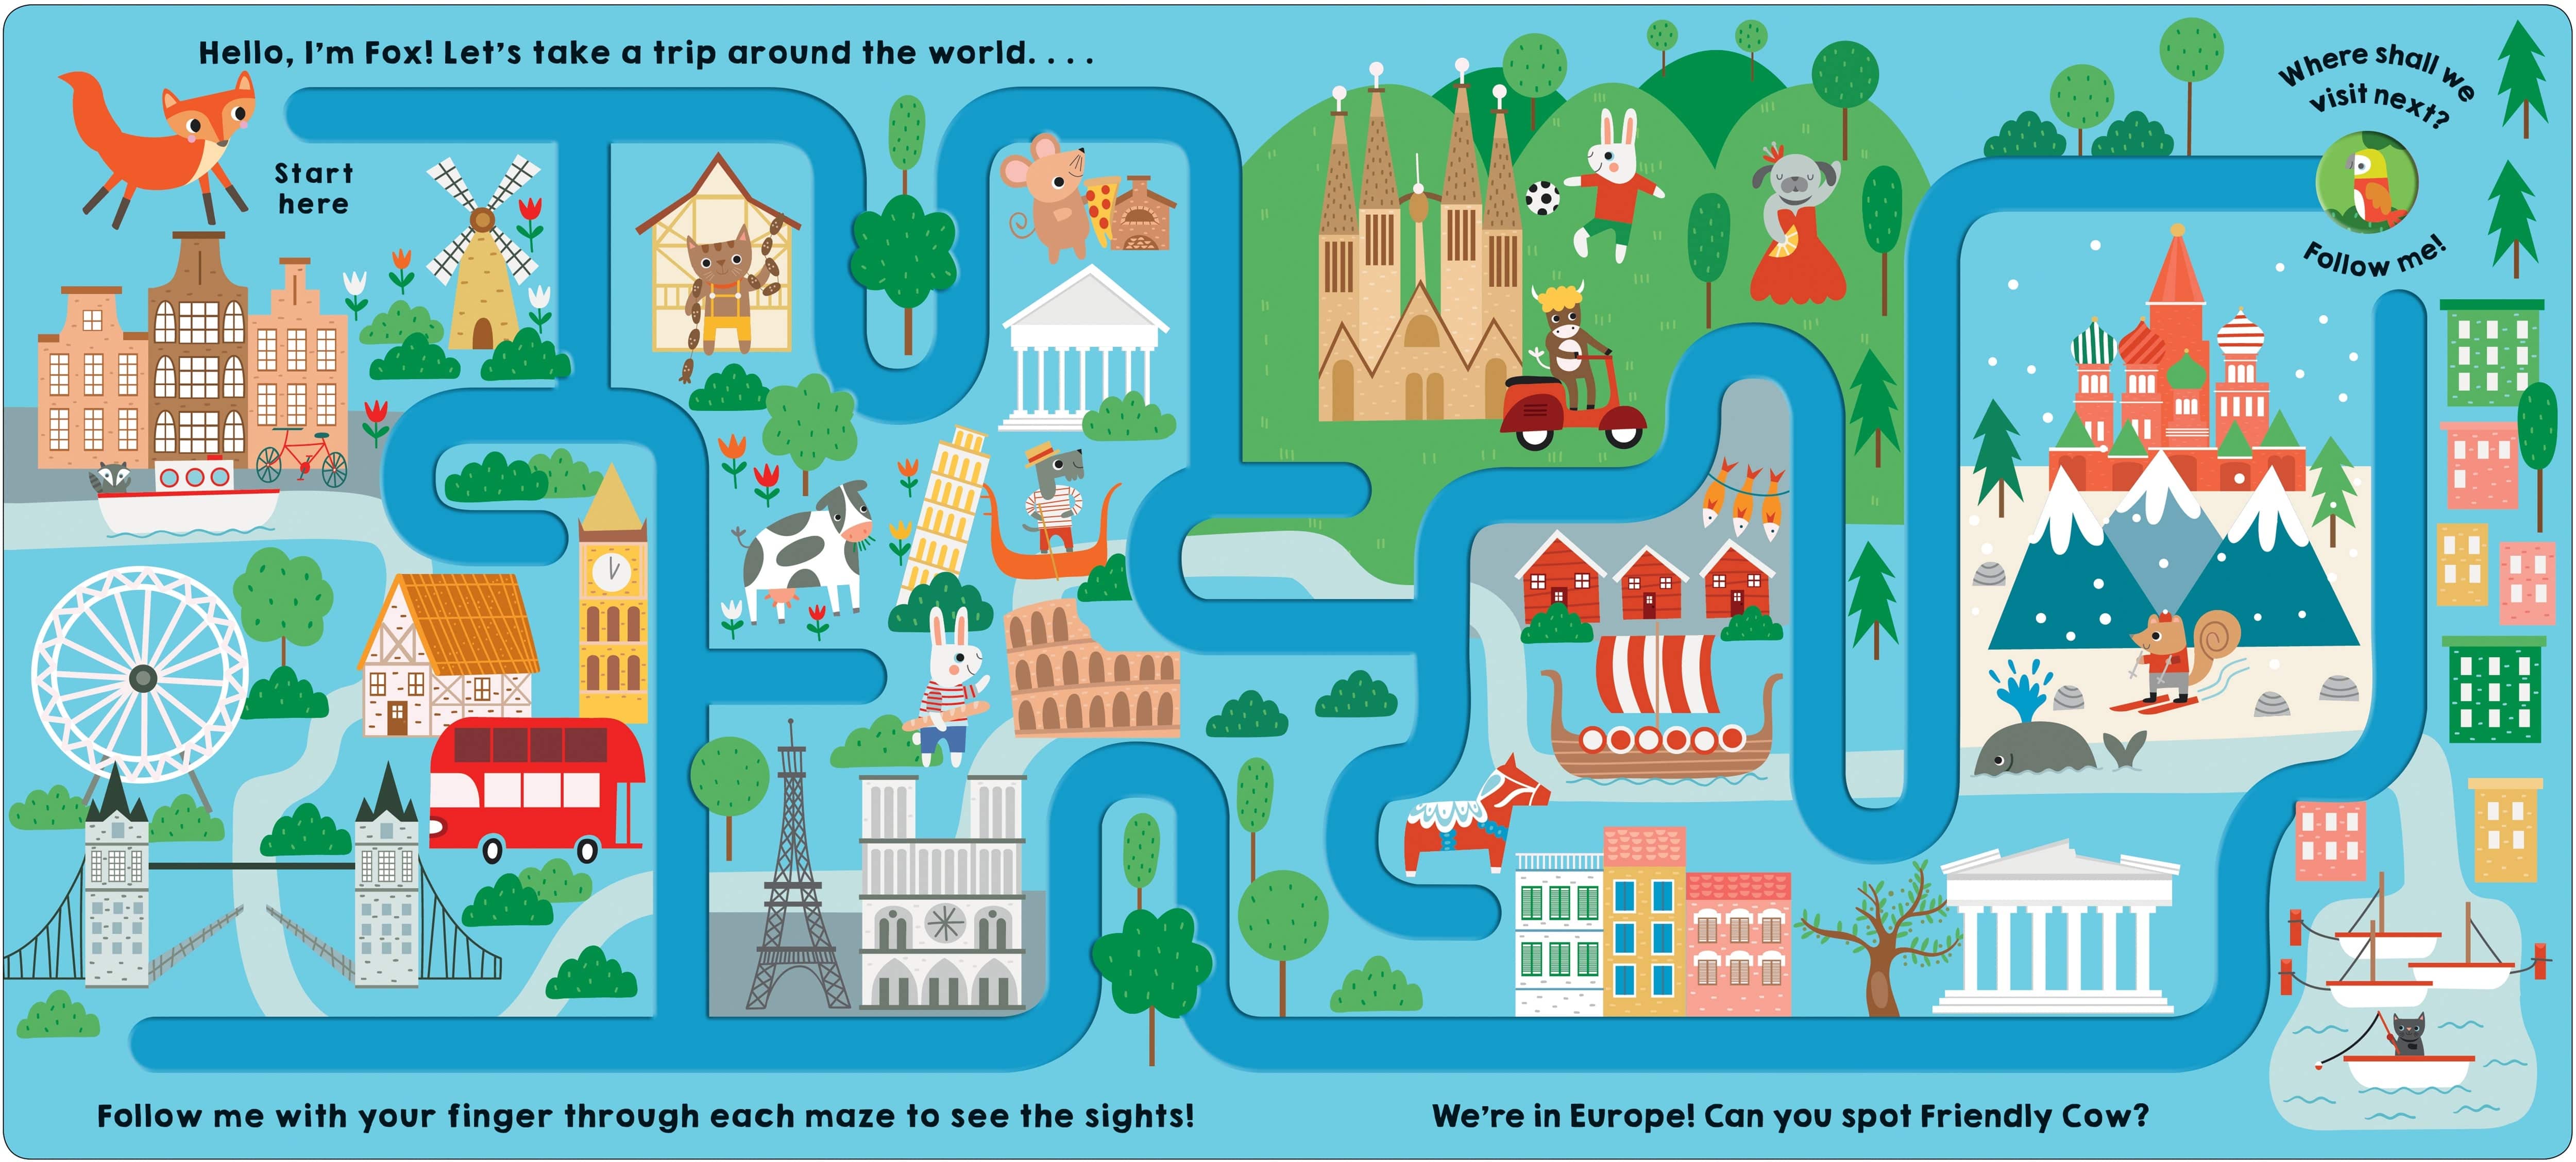 Maze Book: Follow Me Around the World - Twinkle Twinkle Little One